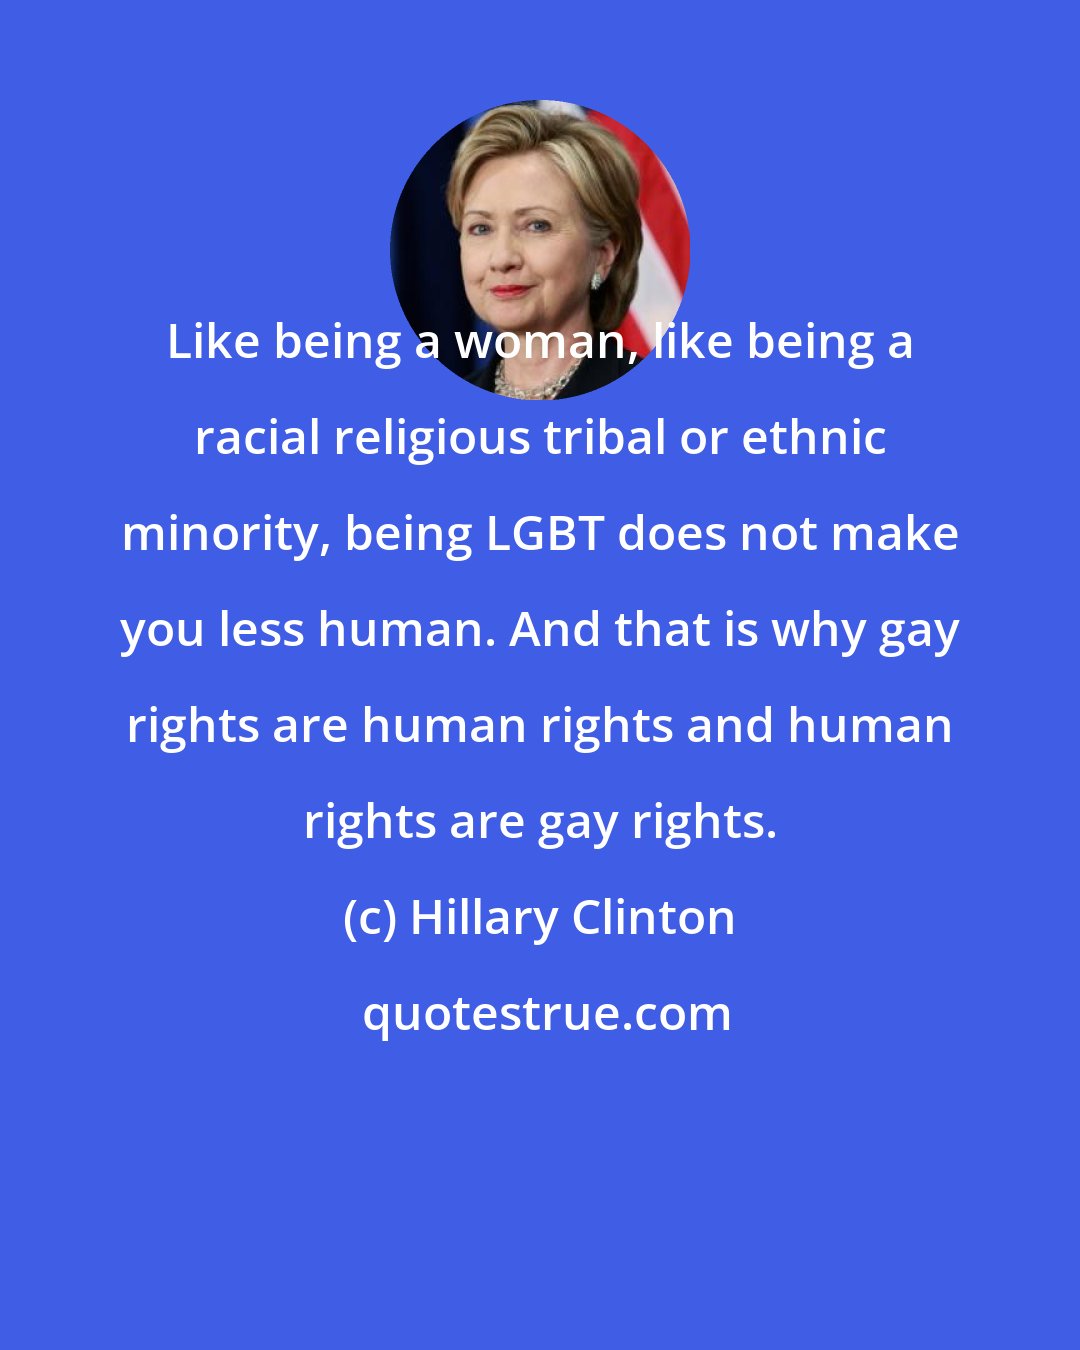 Hillary Clinton: Like being a woman, like being a racial religious tribal or ethnic minority, being LGBT does not make you less human. And that is why gay rights are human rights and human rights are gay rights.